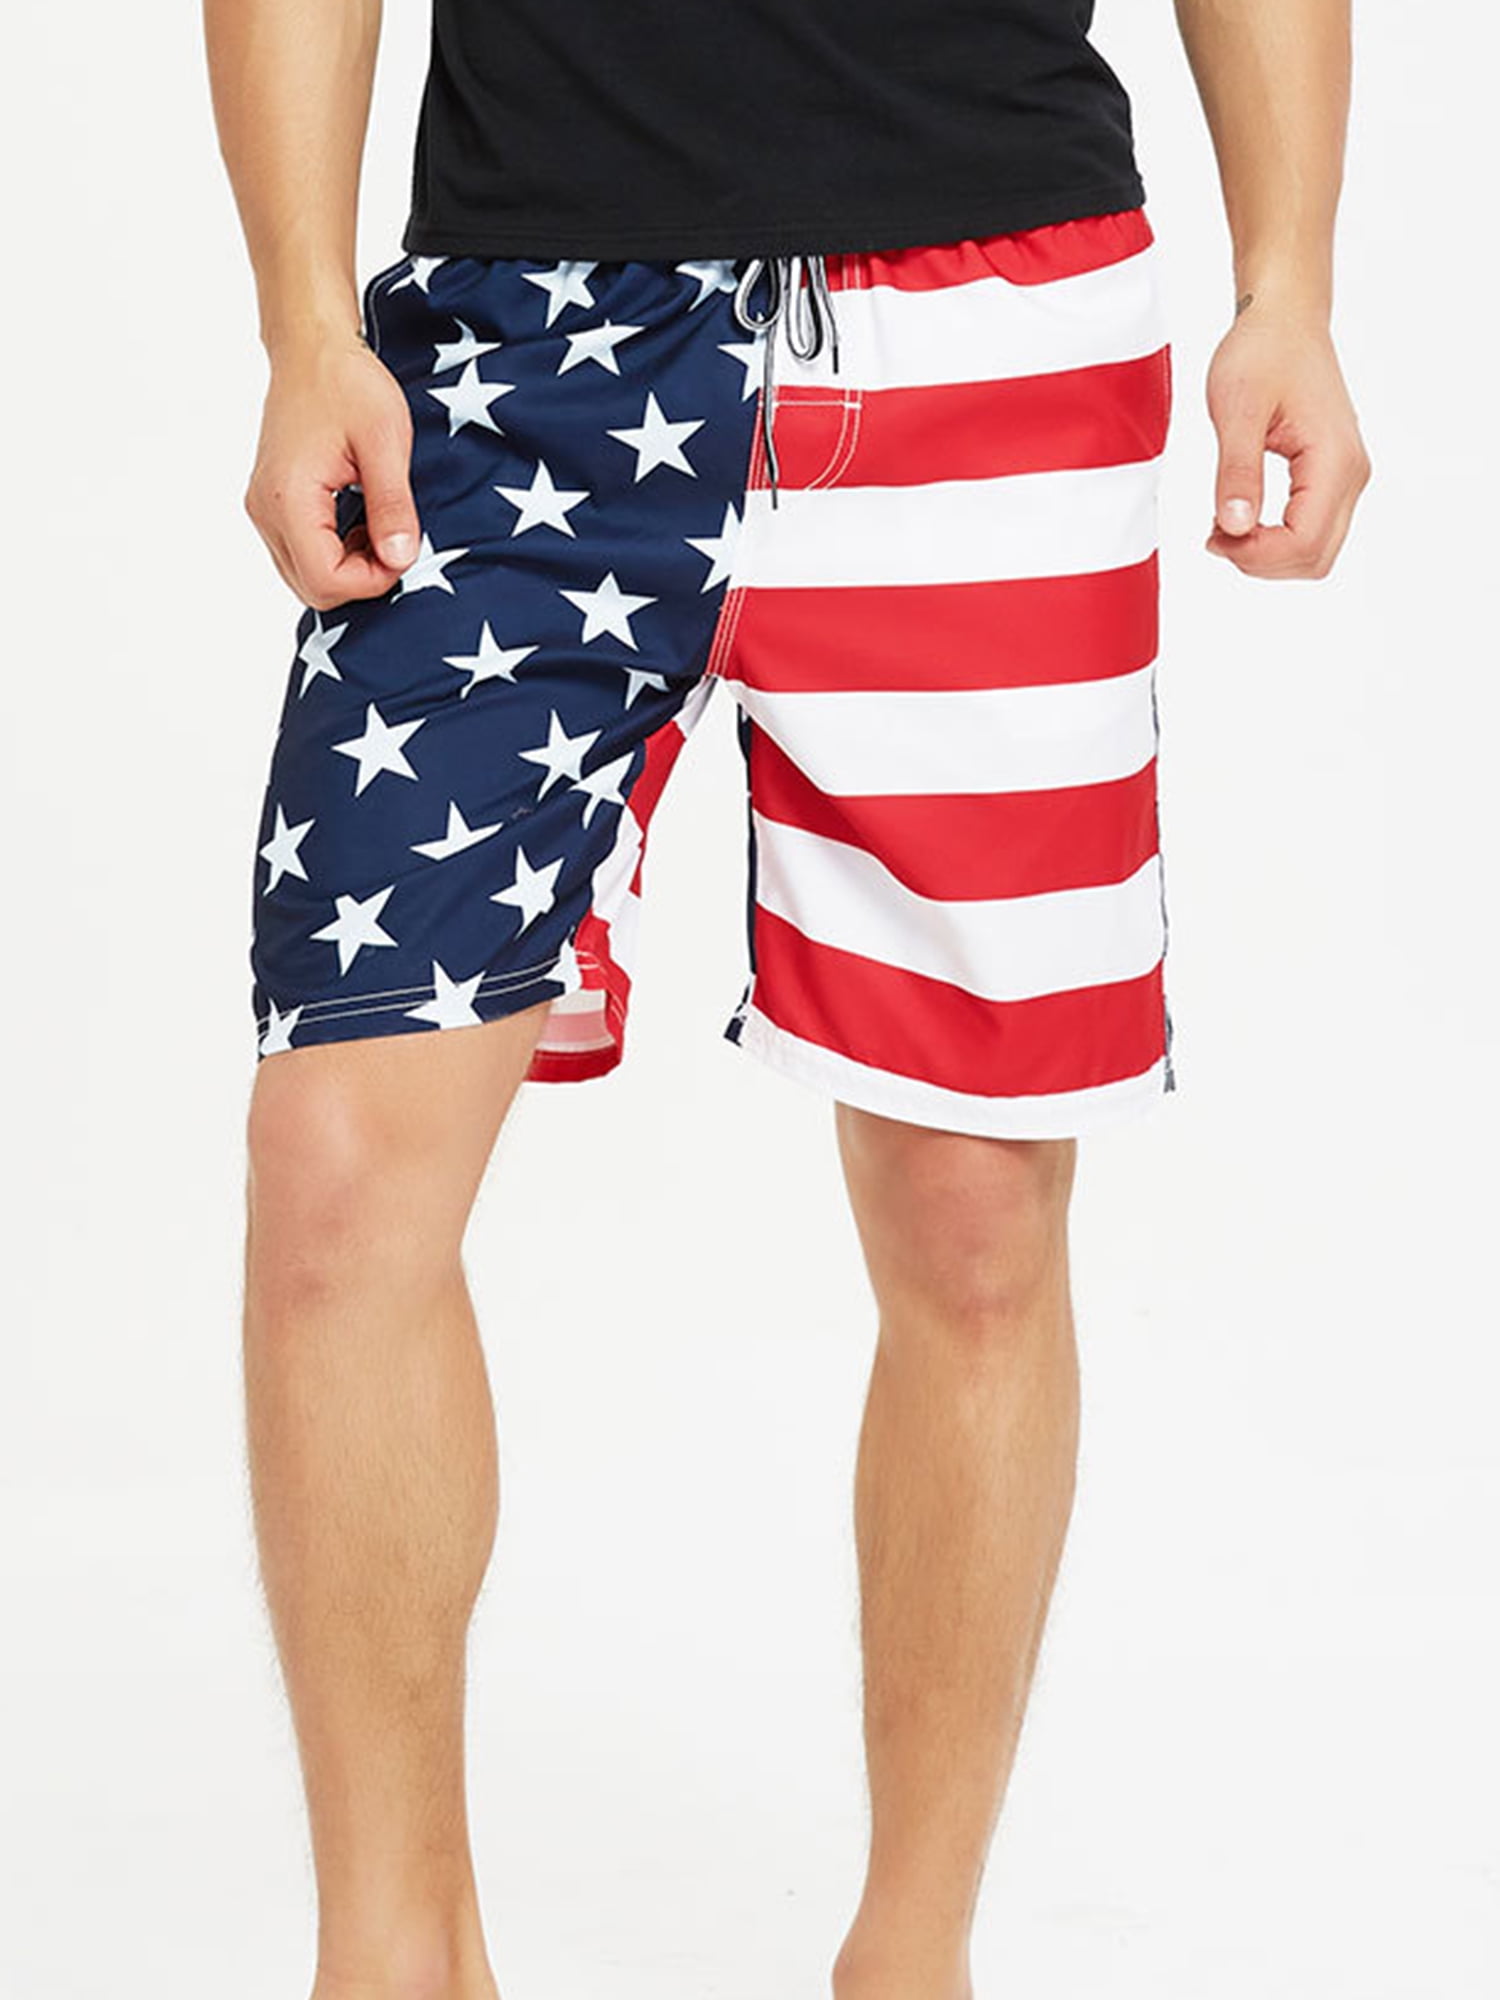 FASUWAVE Mens Swim Trunks Spain Flag with America Flag Quick Dry Beach Board Shorts with Mesh Lining